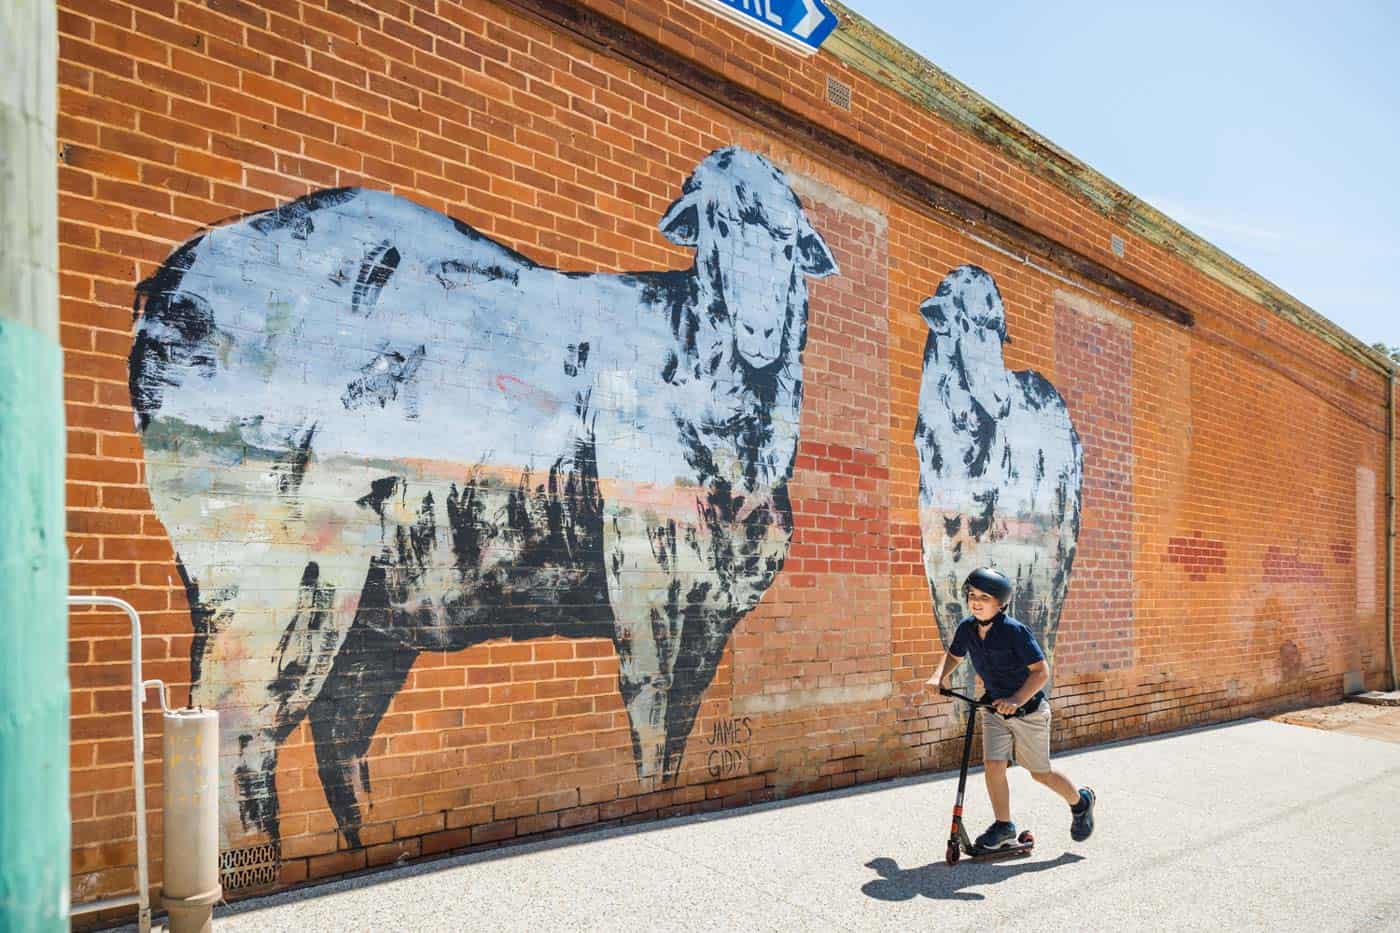 A young boy riding on a scooter in front of a brick building with a mural of 2 sheep in Beverley